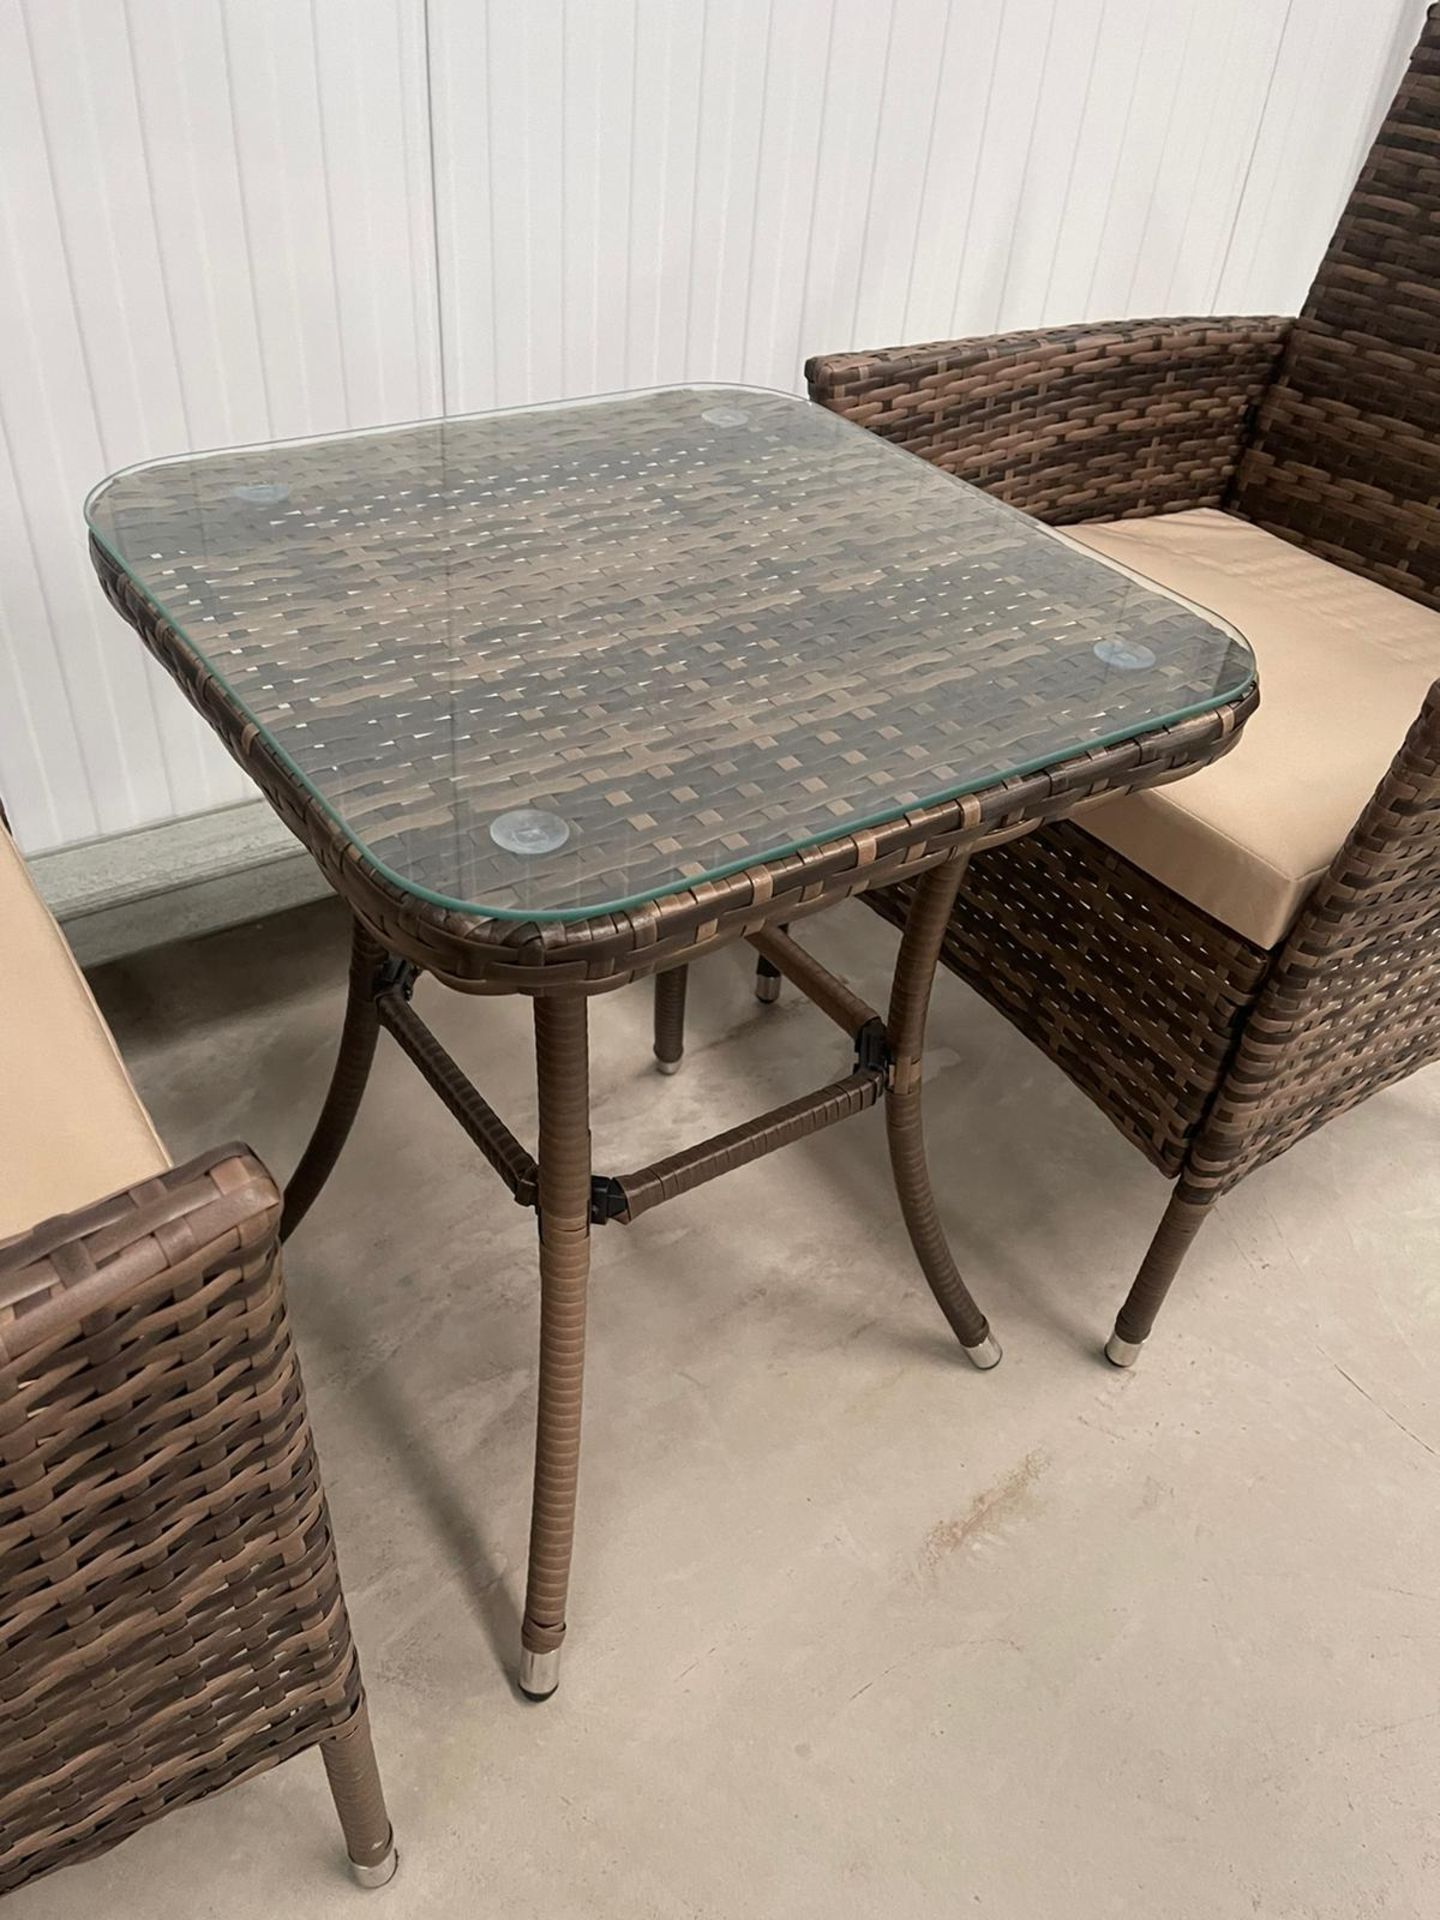 RRP £229 - NEW BROWN BISTRO SET WITH TALL TABLE. TABLE 46 X 46 X 62CM, CHAIR 51 X 60 X 83XM - Image 3 of 4